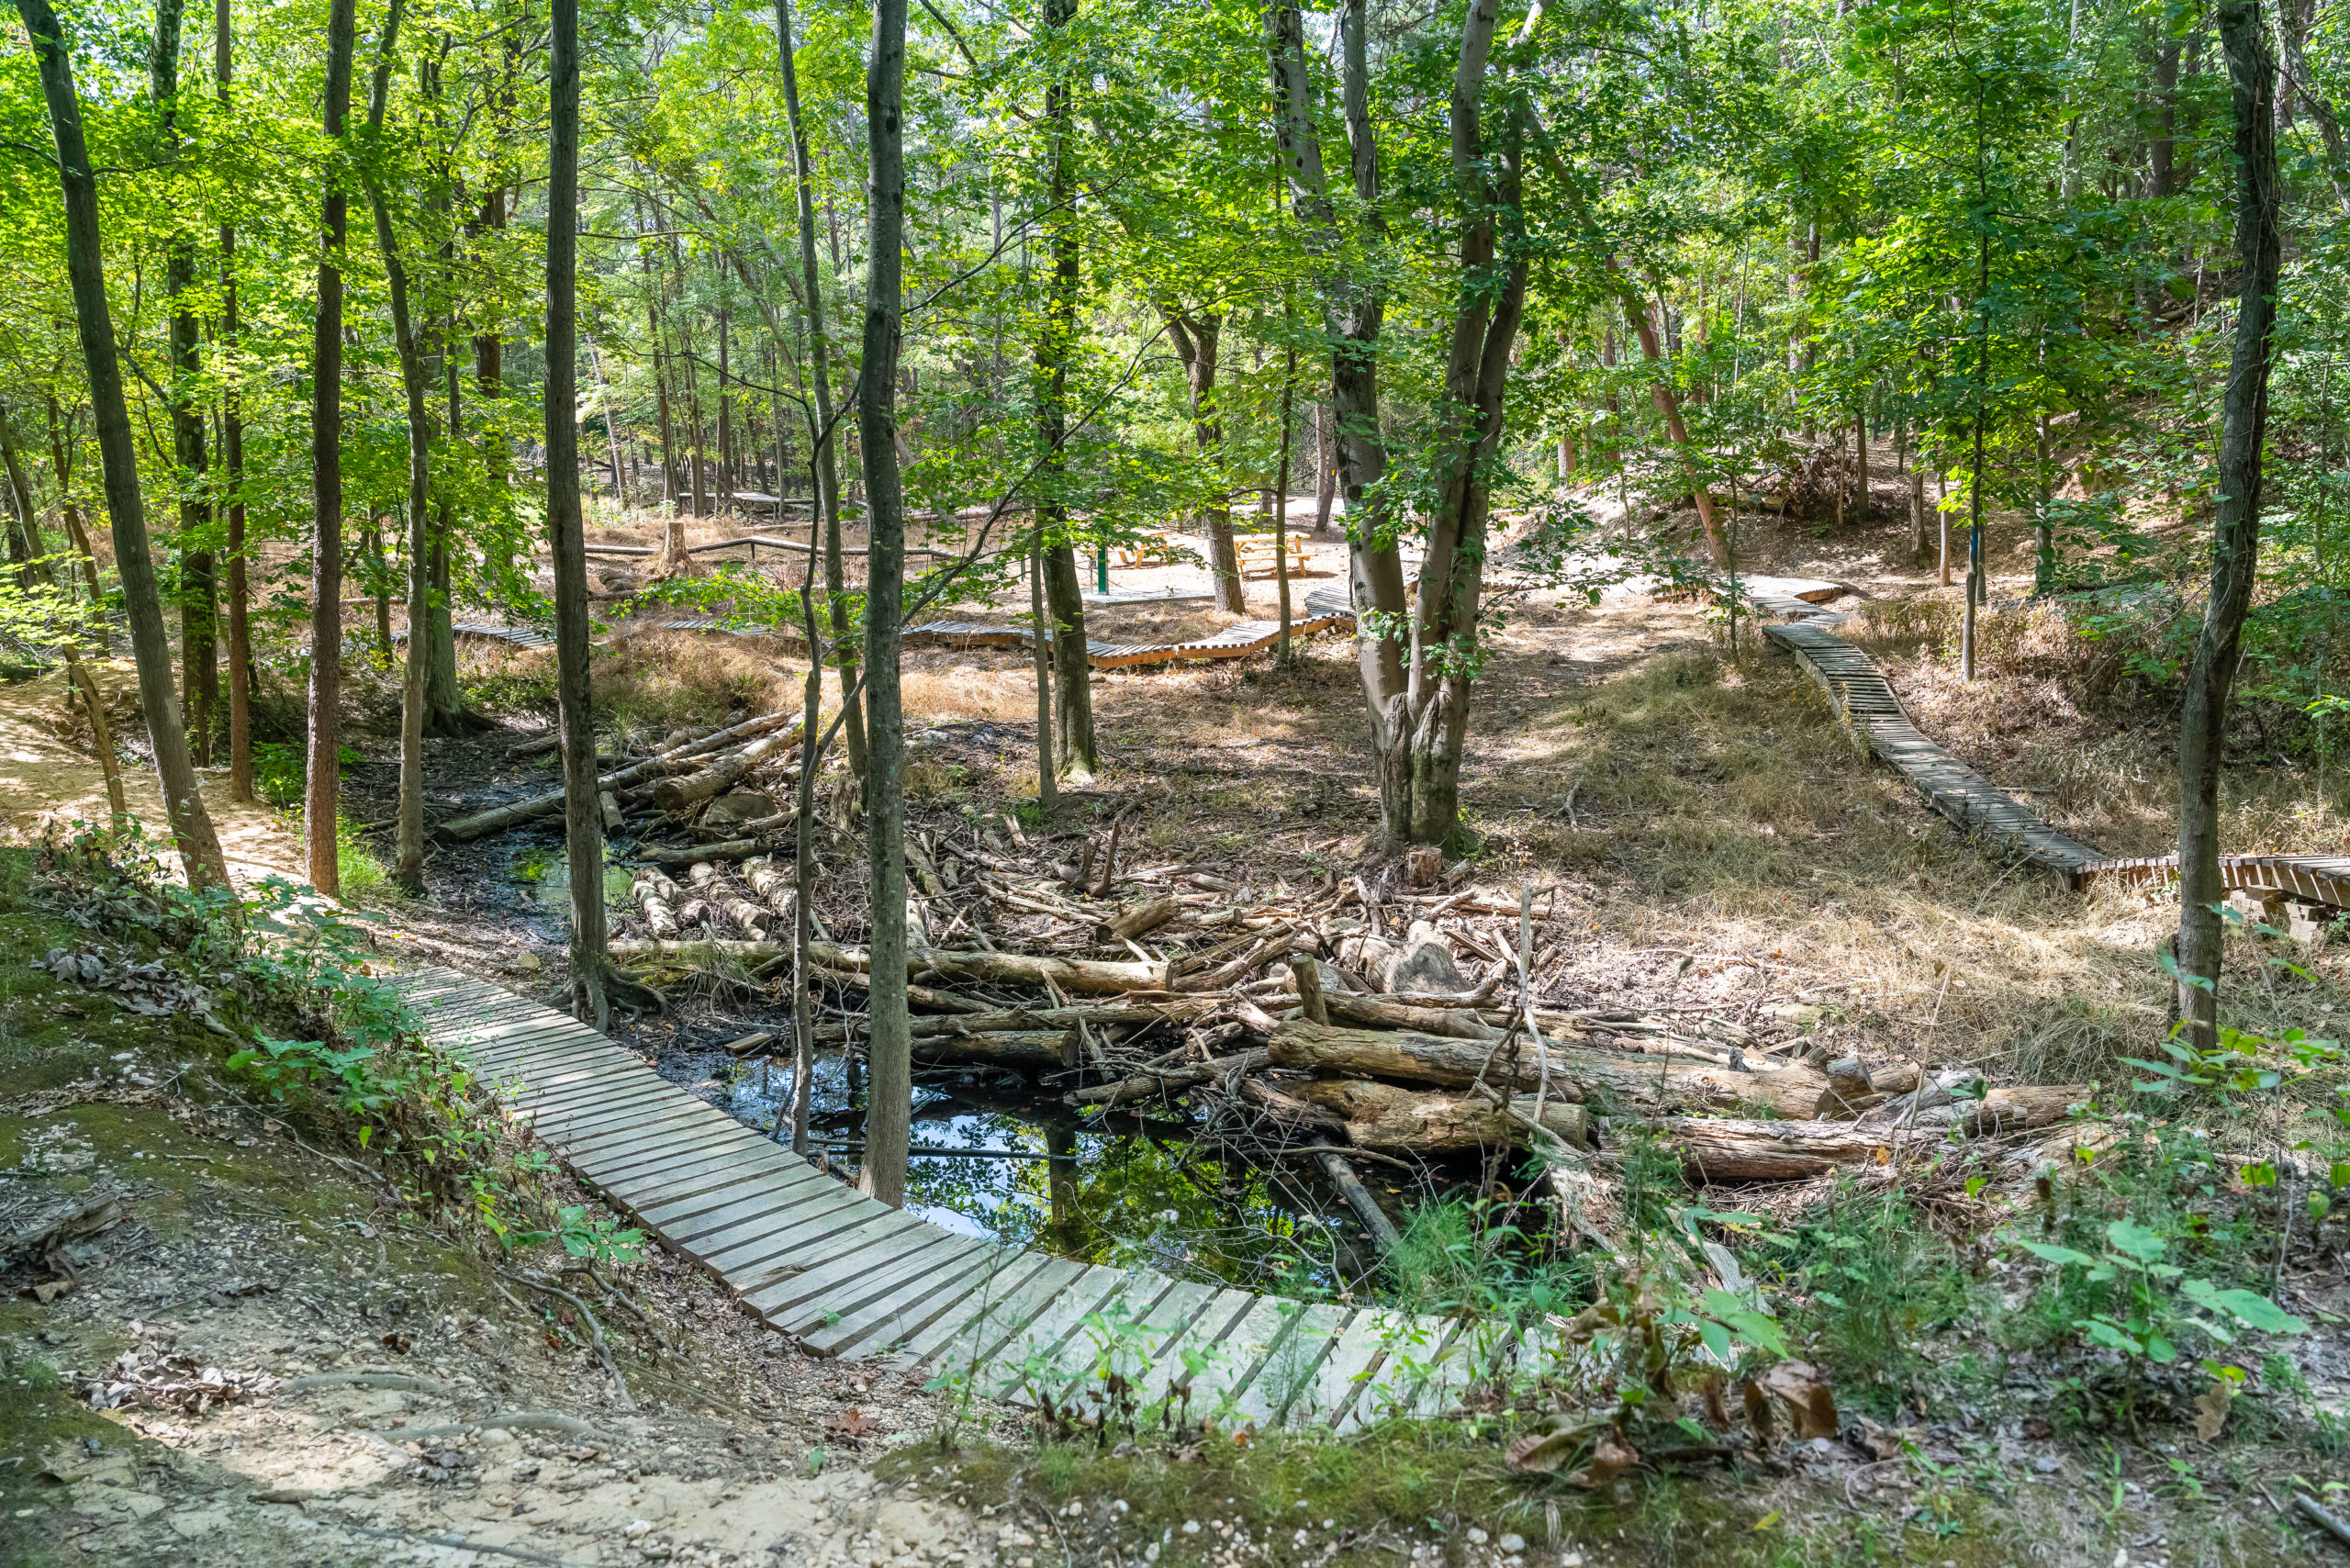 The Pit at Fairland Bike Park